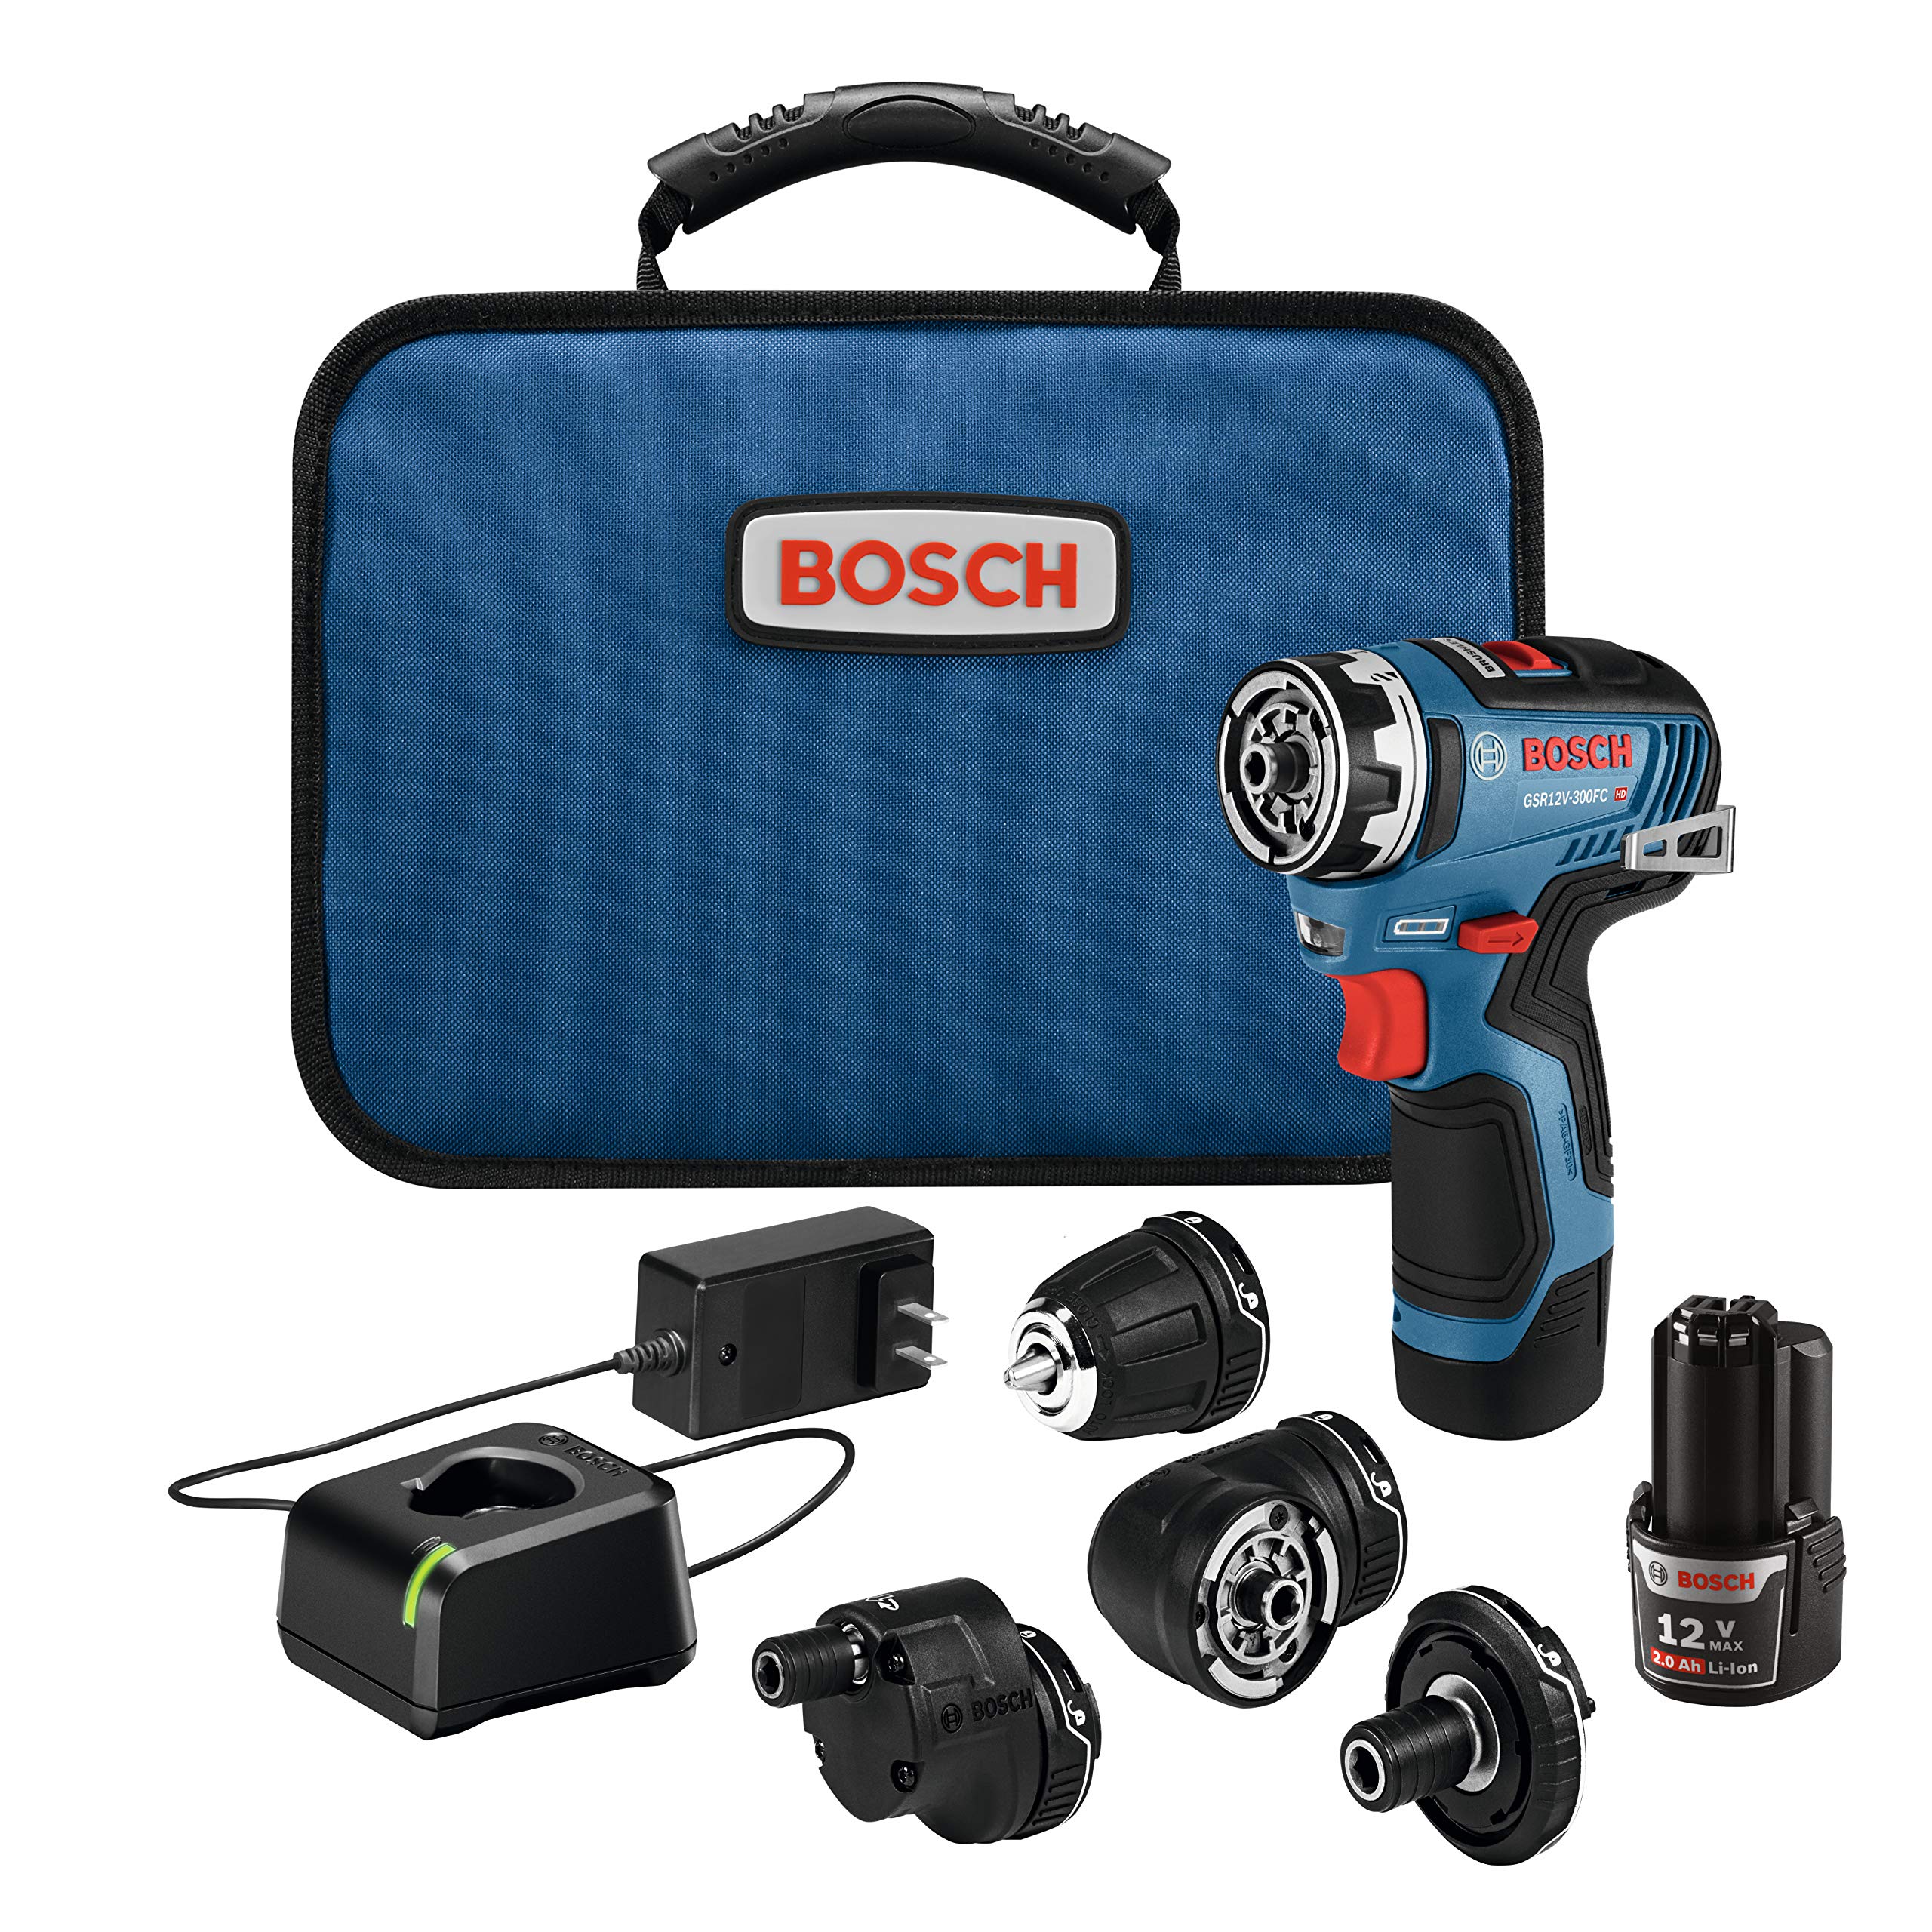 BOSCH GSR12V-300FCB22 12V Max EC Brushless Flexiclick 5-In-1 Drill/Driver System with (2) 2.0 Ah Batteries - $149 + Free Shipping